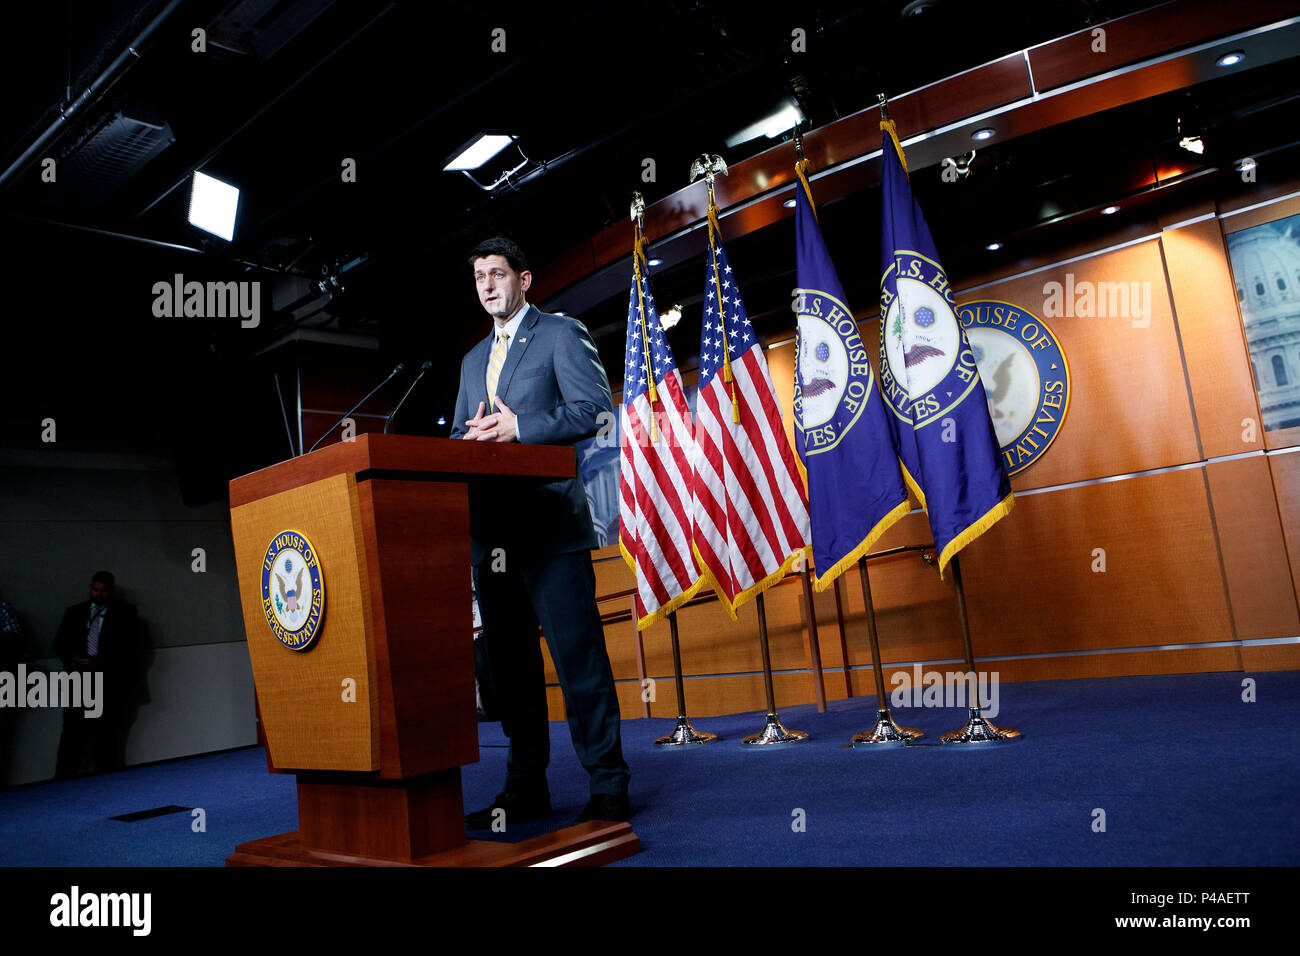 Washington, USA. 21st June, 2018. U.S. House Speaker Paul Ryan holds a press conference on the immigration bill on Capitol Hill in Washington, DC, the United States, on June 21, 2018. Republican leaders in the U.S. House of Representatives on Thursday delayed a vote on a 'moderate' immigration bill amid chaos over the White House practice of separating families who illegally cross the U.S. border. Credit: Ting Shen/Xinhua/Alamy Live News Stock Photo